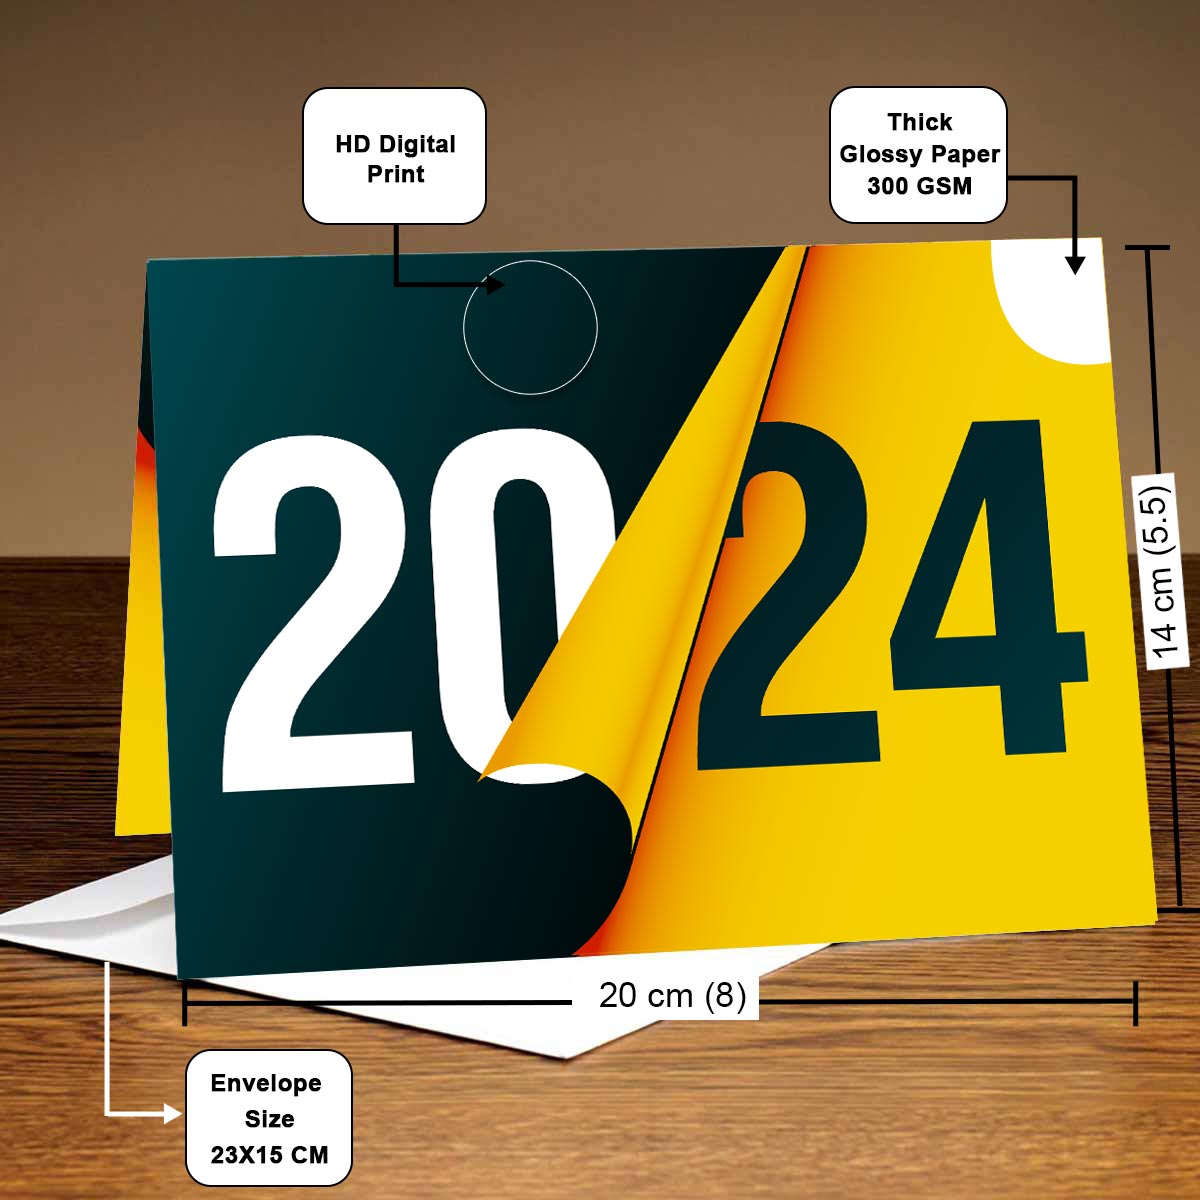 Welcome 2024 New Year Greeting Card